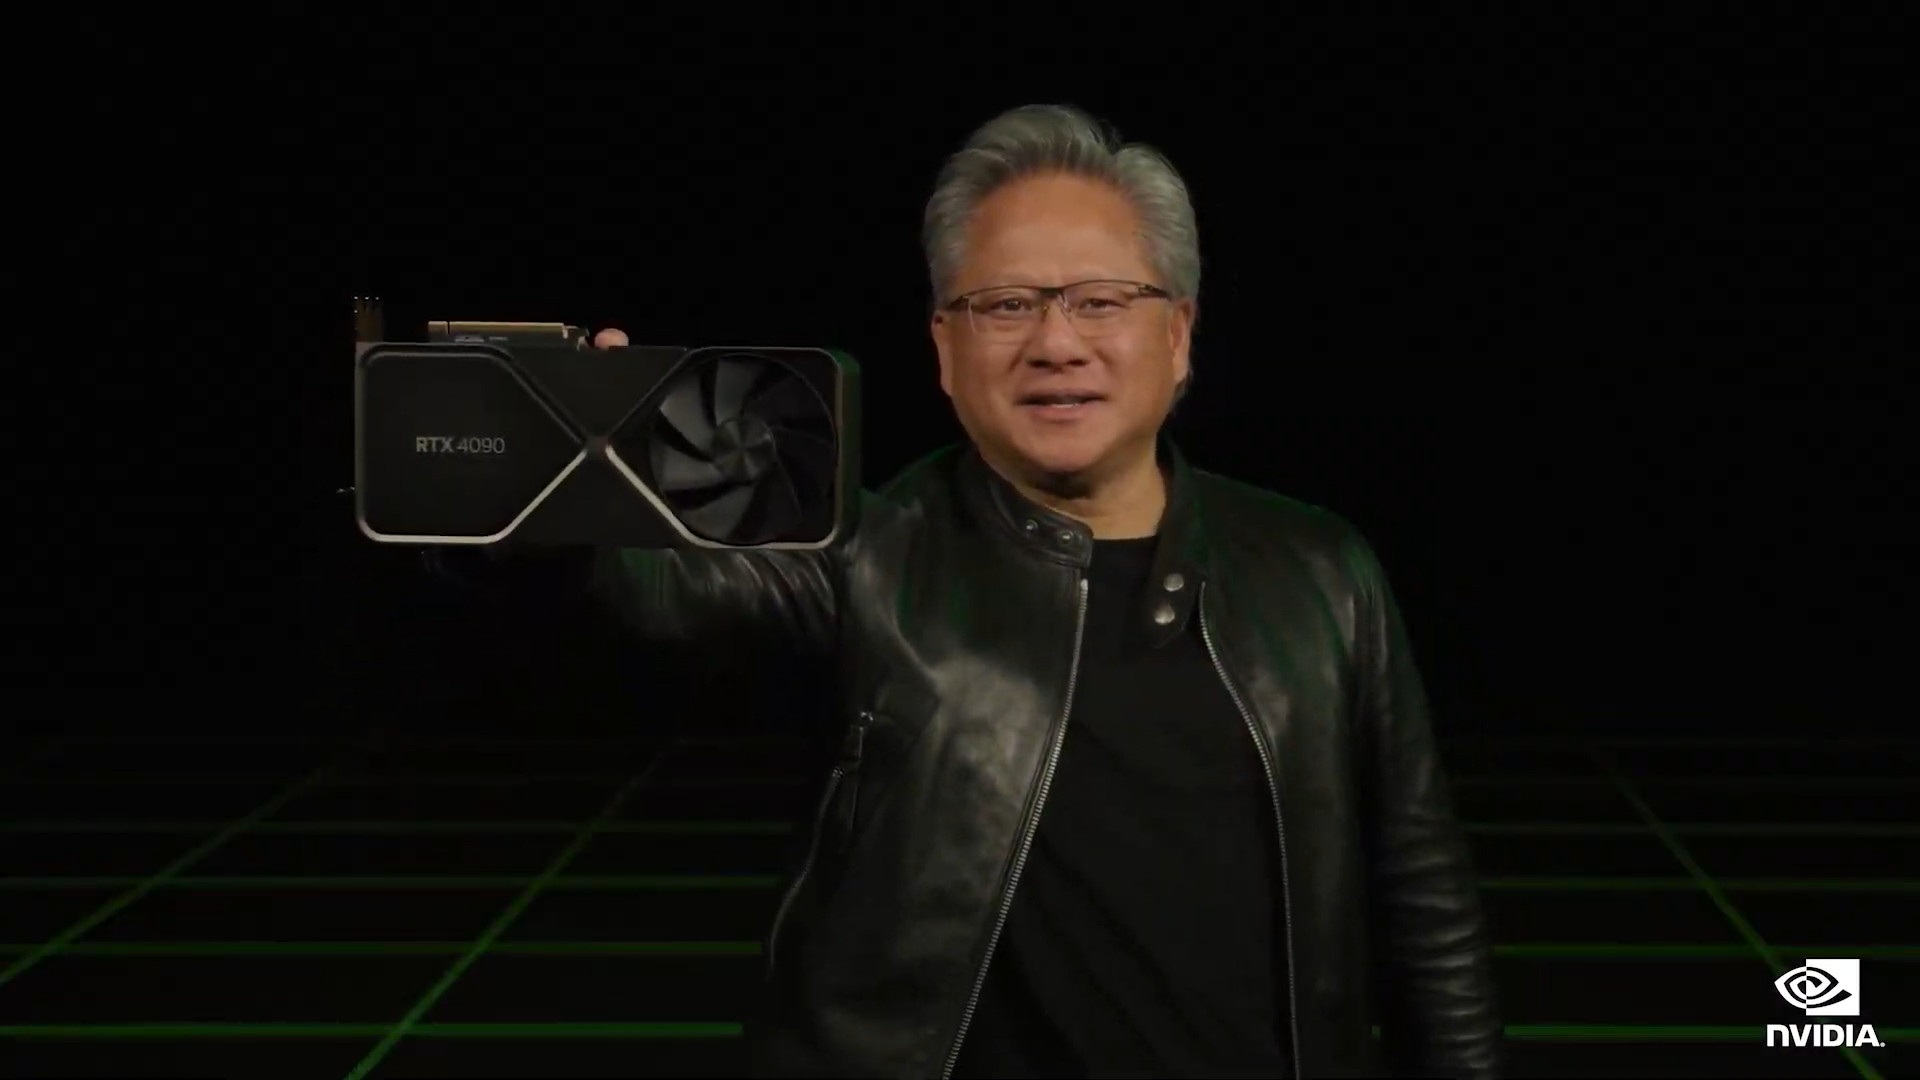 RTX 4090 & Co.: There should be no more falling prices, according to Nvidia